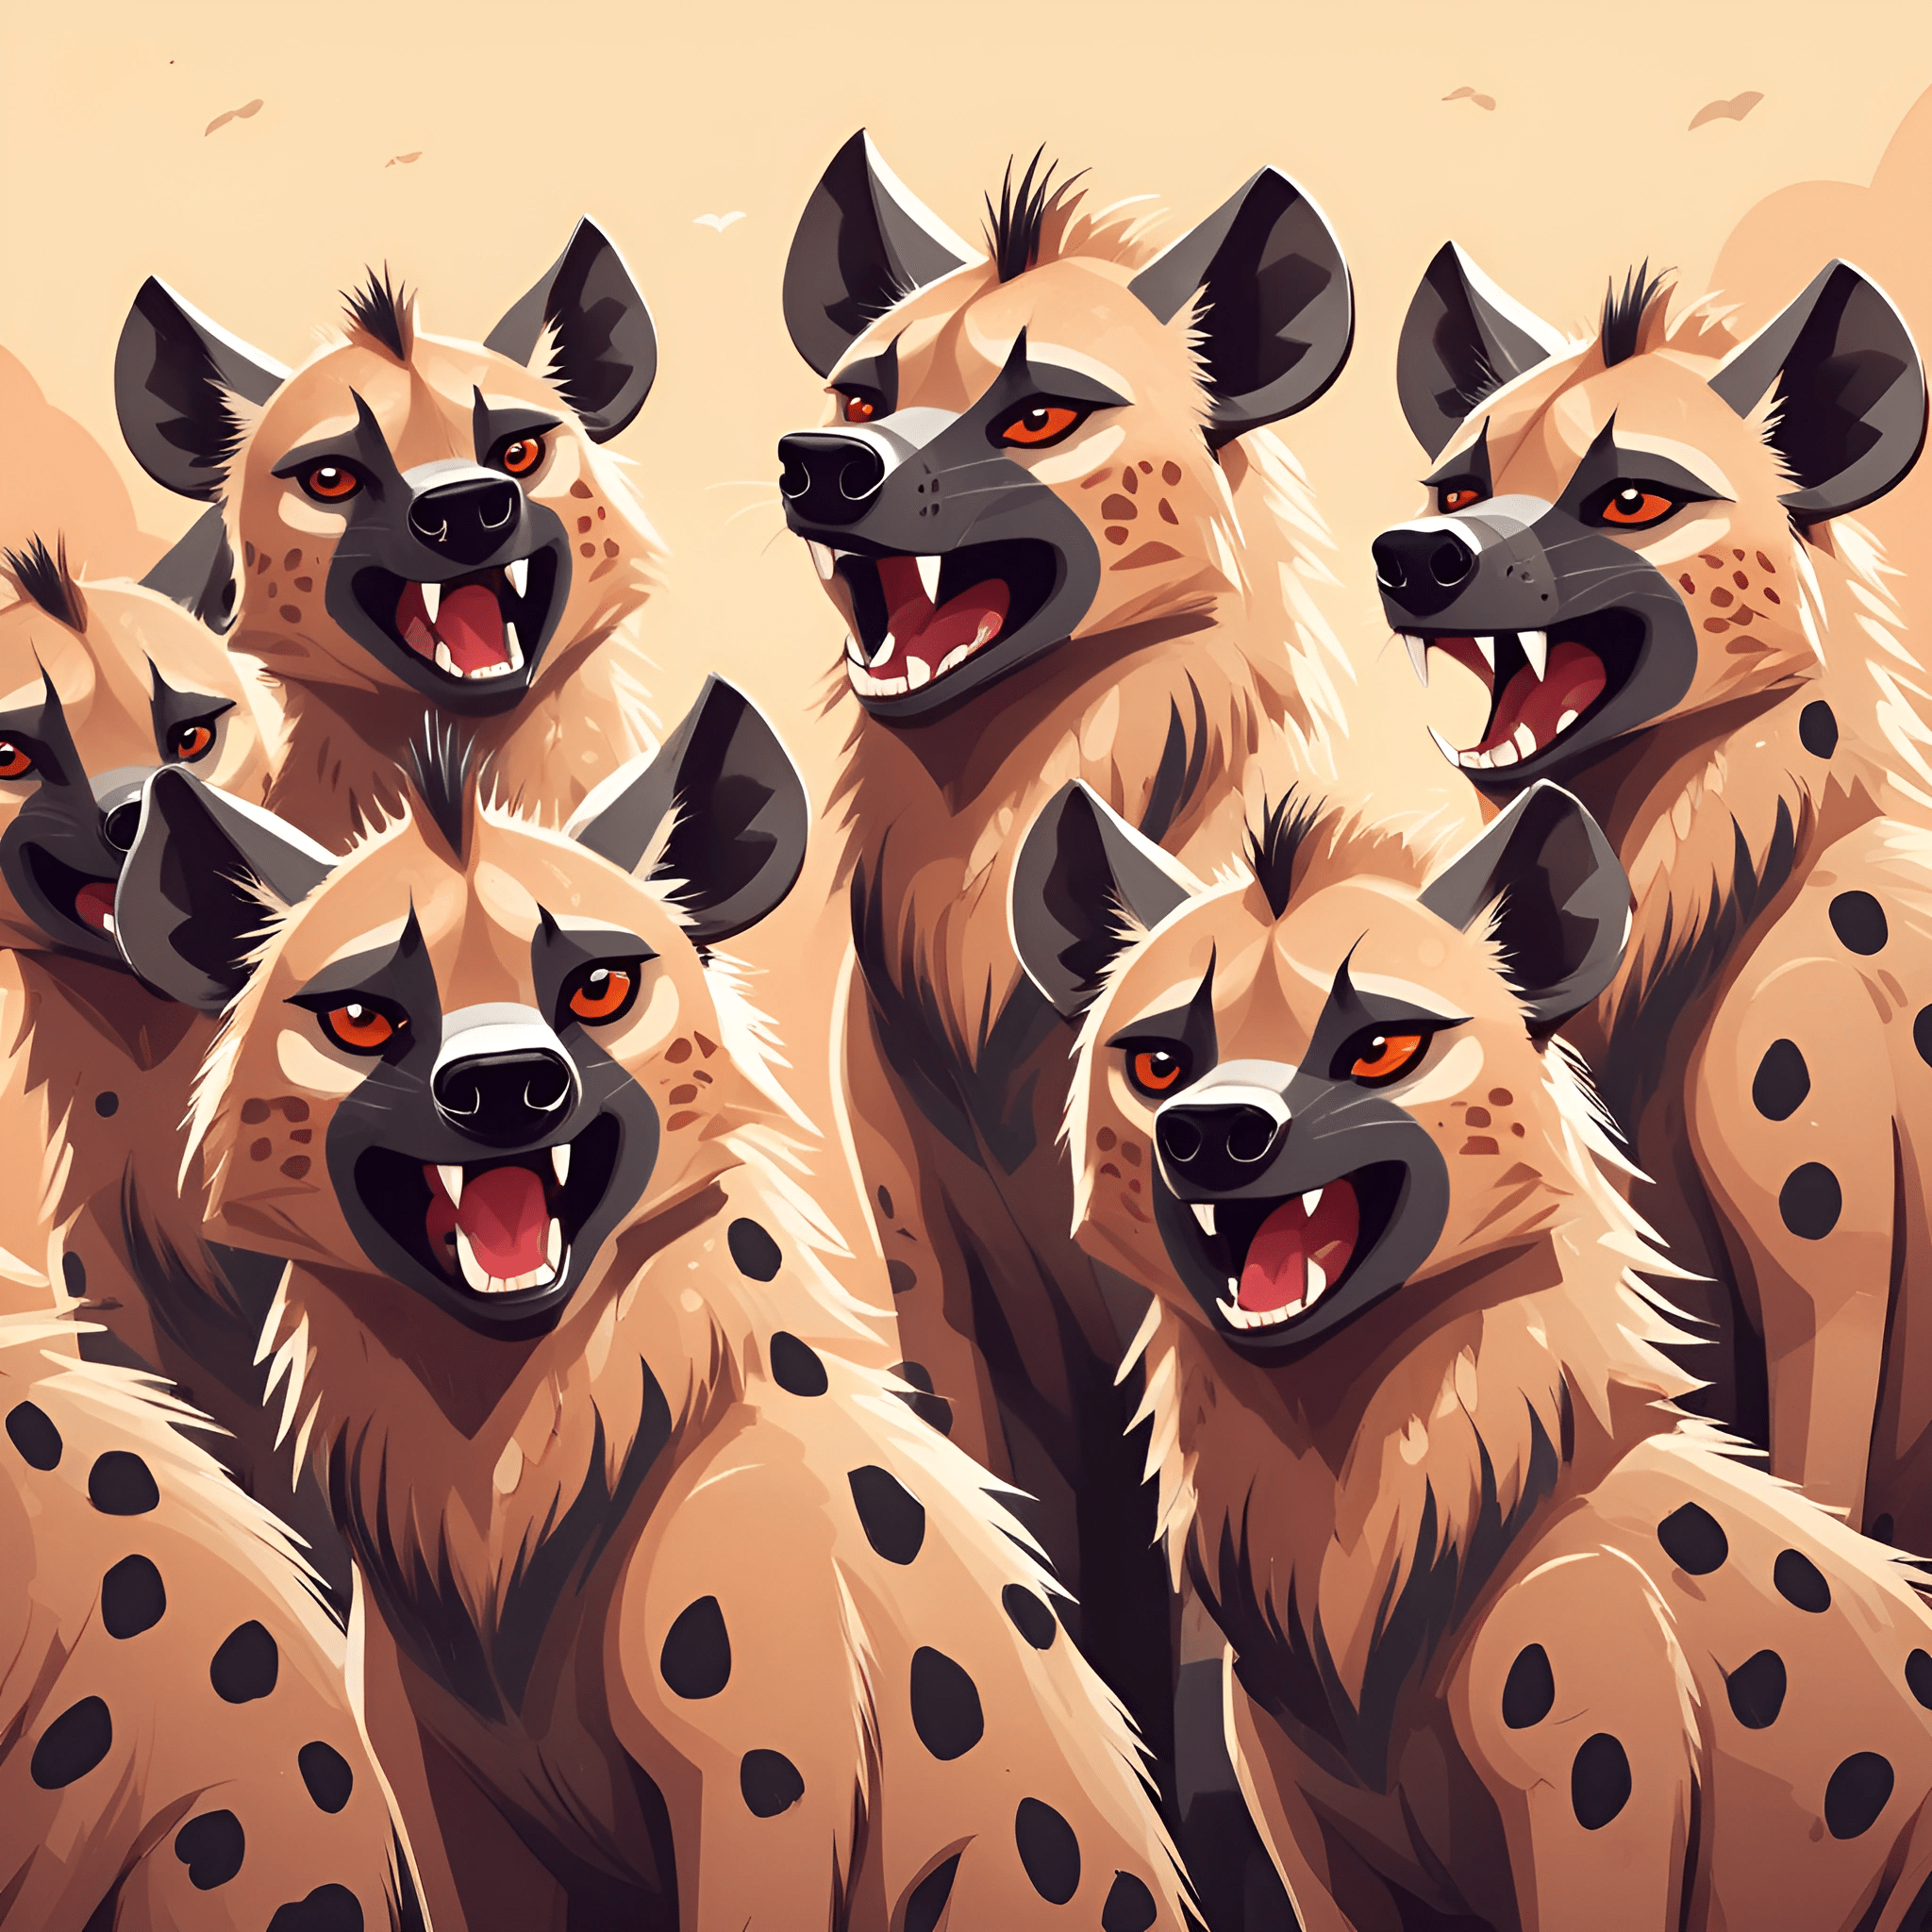 there are many hyenas that are standing together in a group